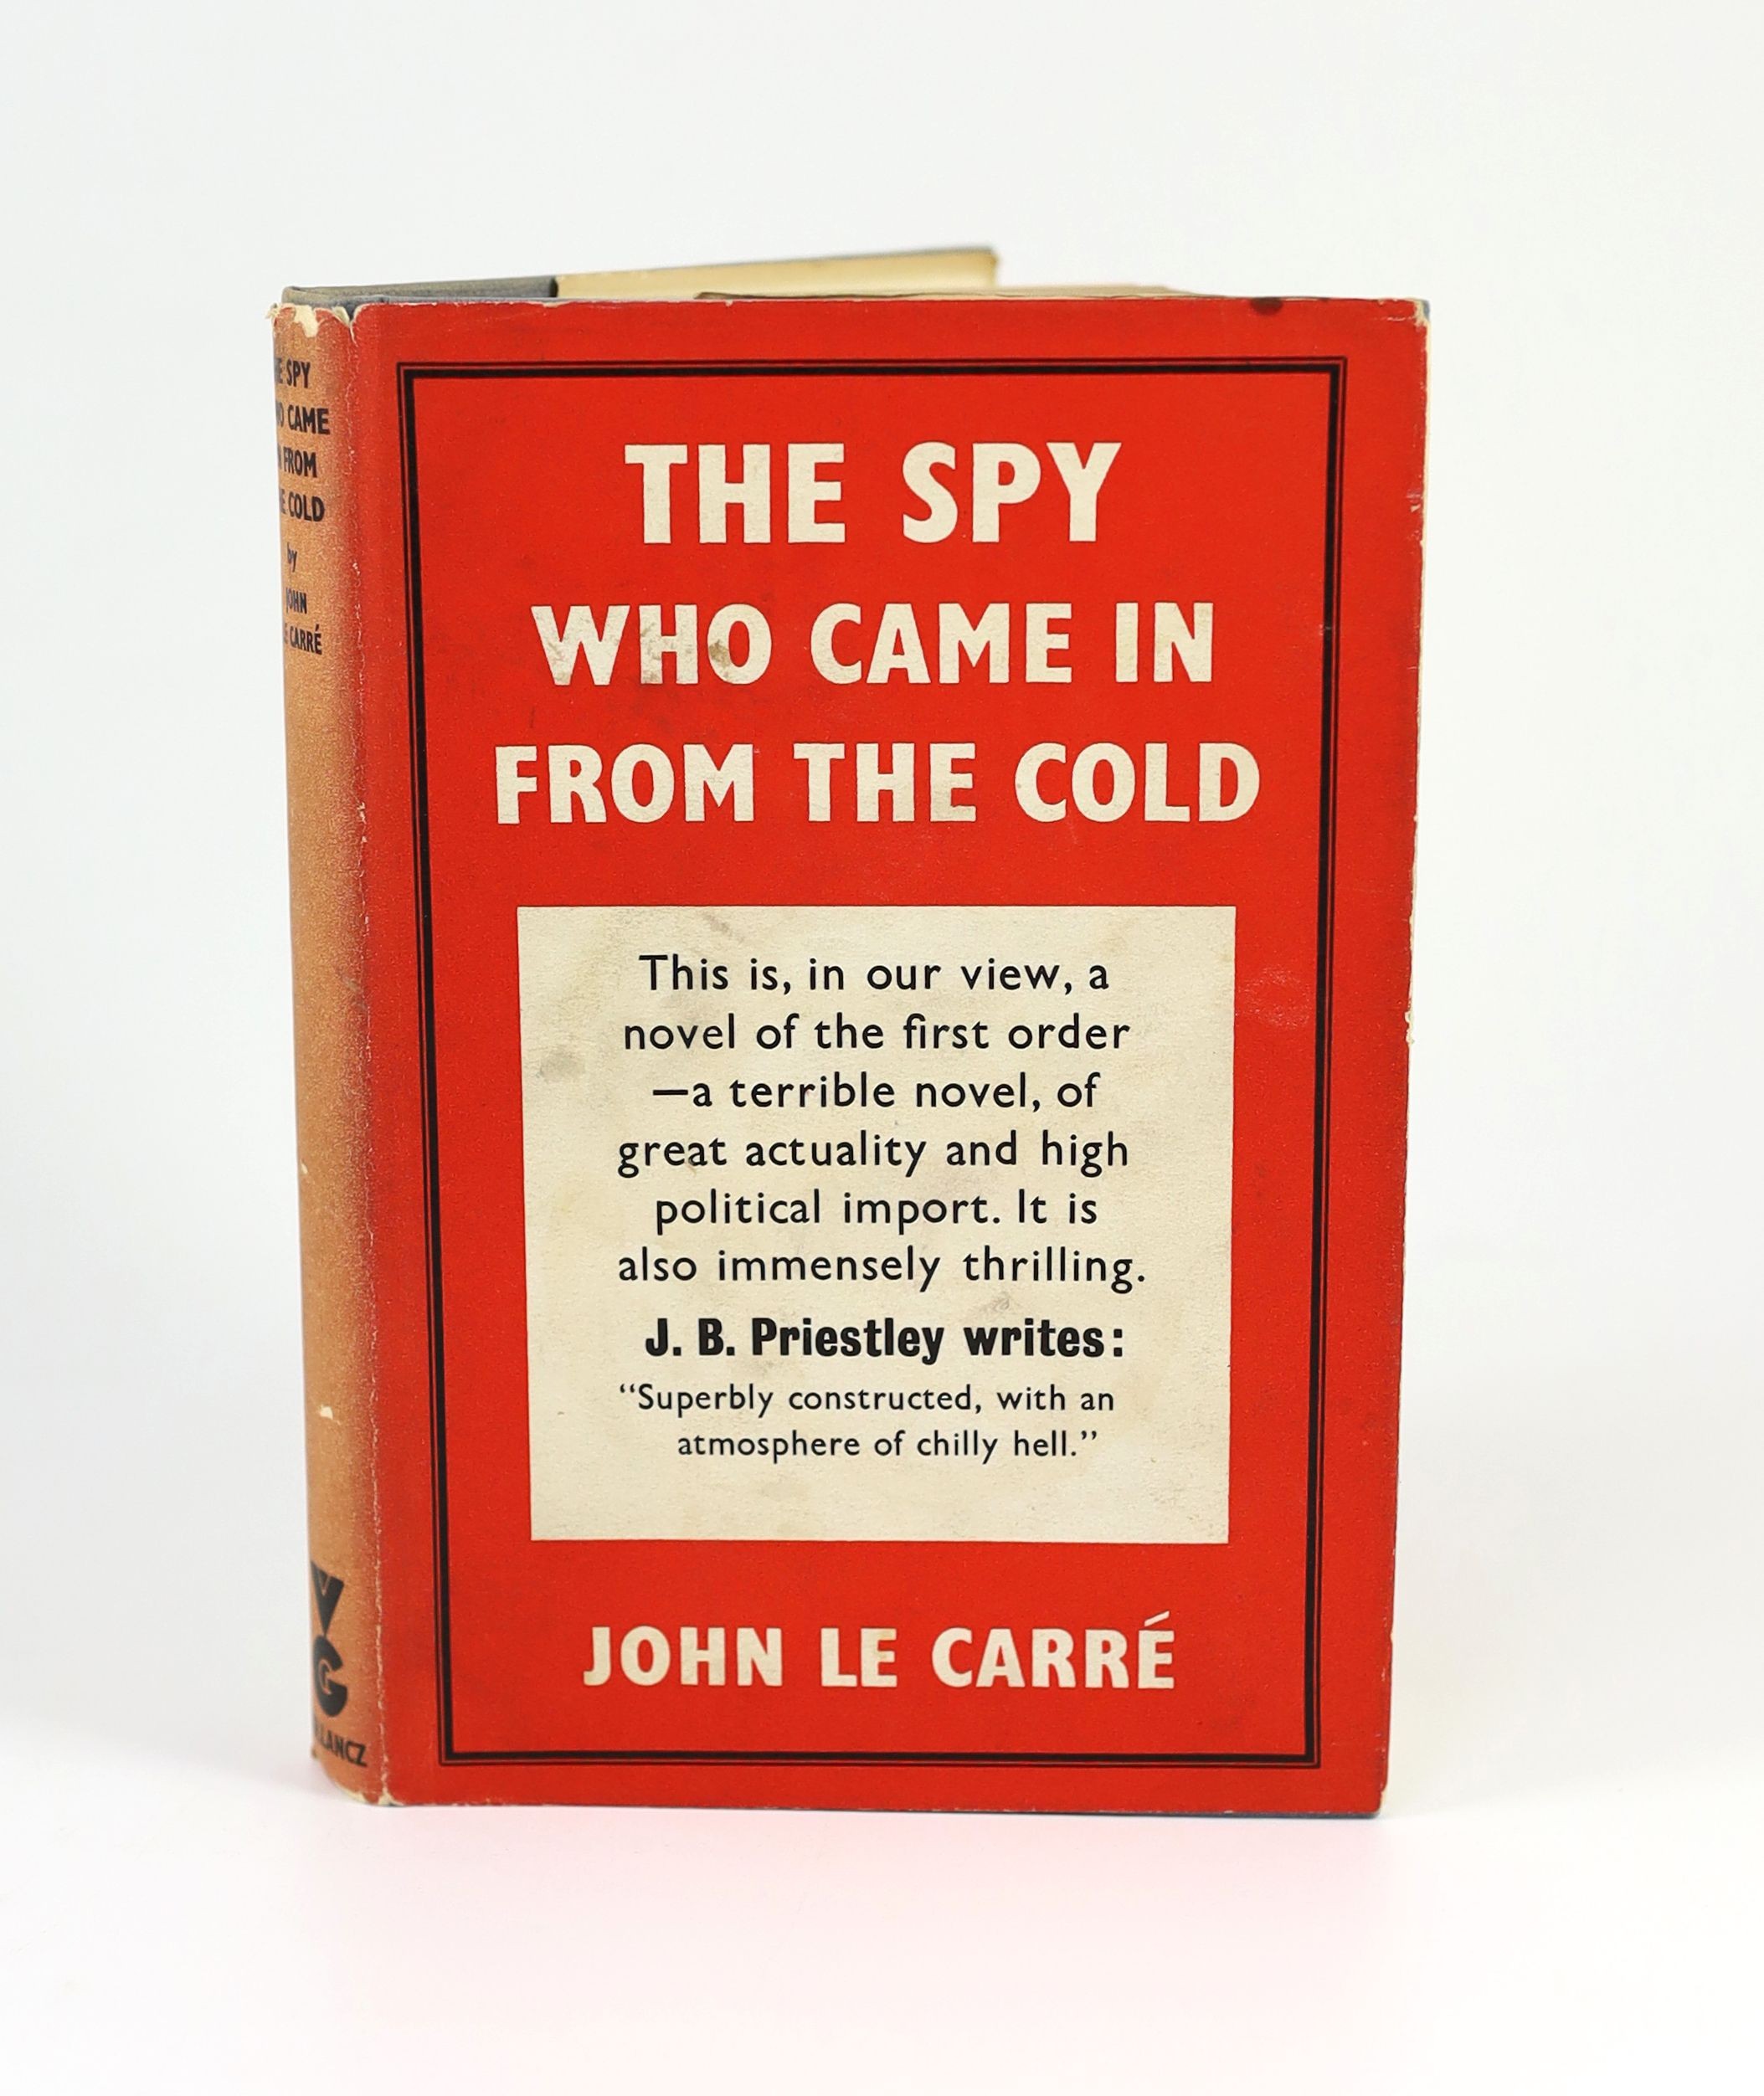 Le Carre, John - The Spy Who Came In From the Cold, 1st edition, 8vo, in unclipped d/j, with spine panel lightly sunned, jacket spine head chipped, Victor Gollancz, London, 1963